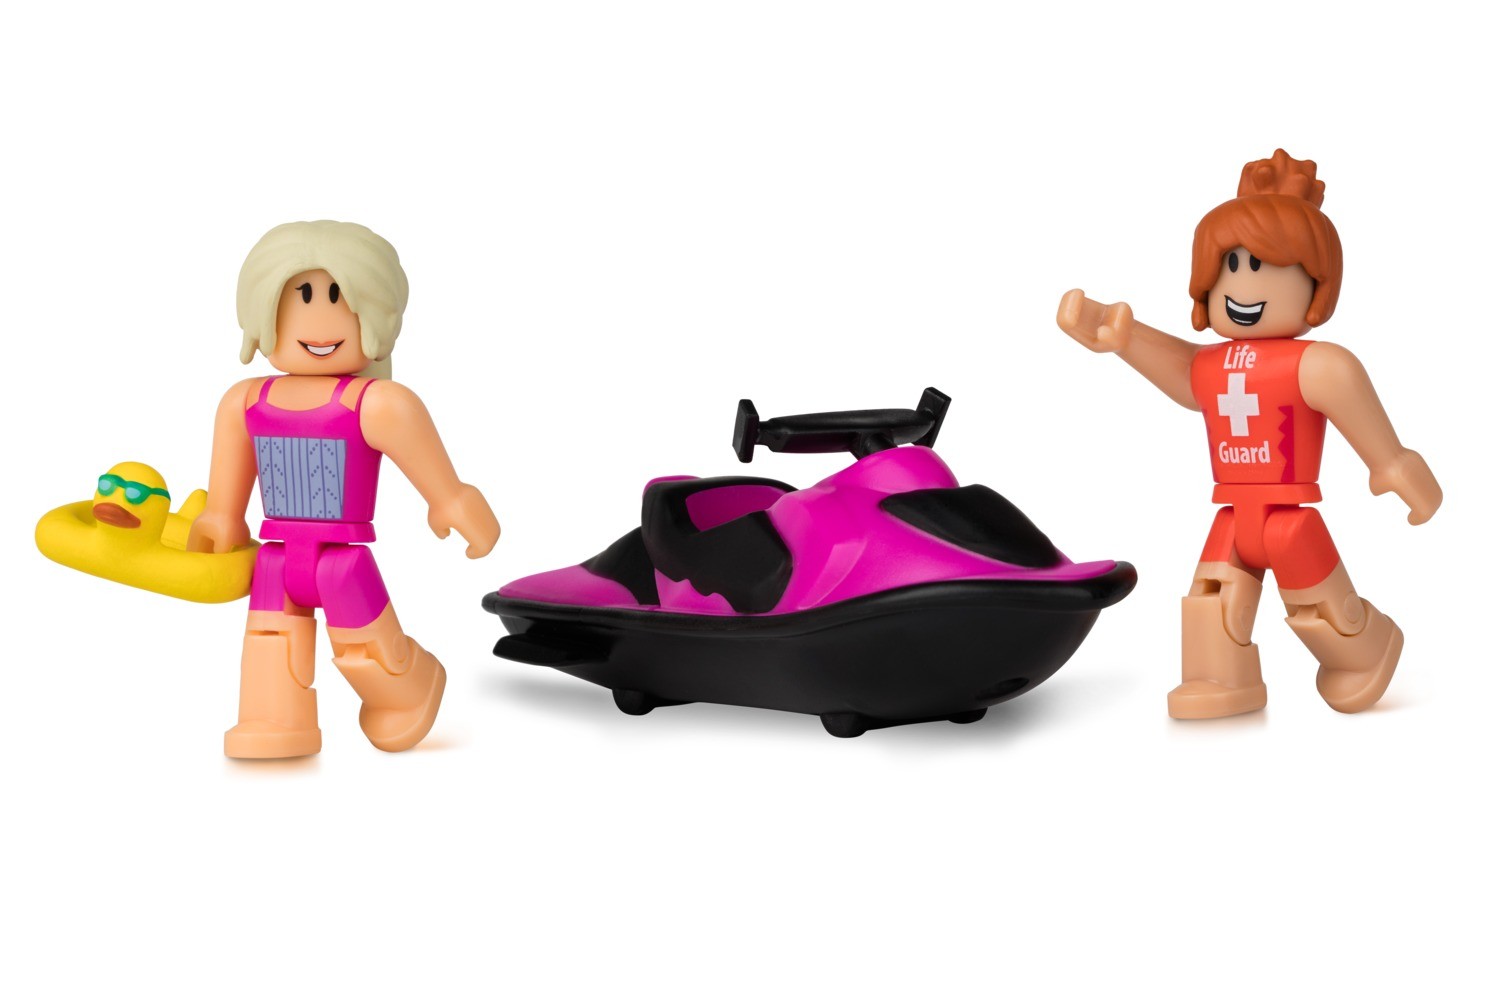 The Plaza Jet Skiers Roblox Action Figure - zed roblox toy